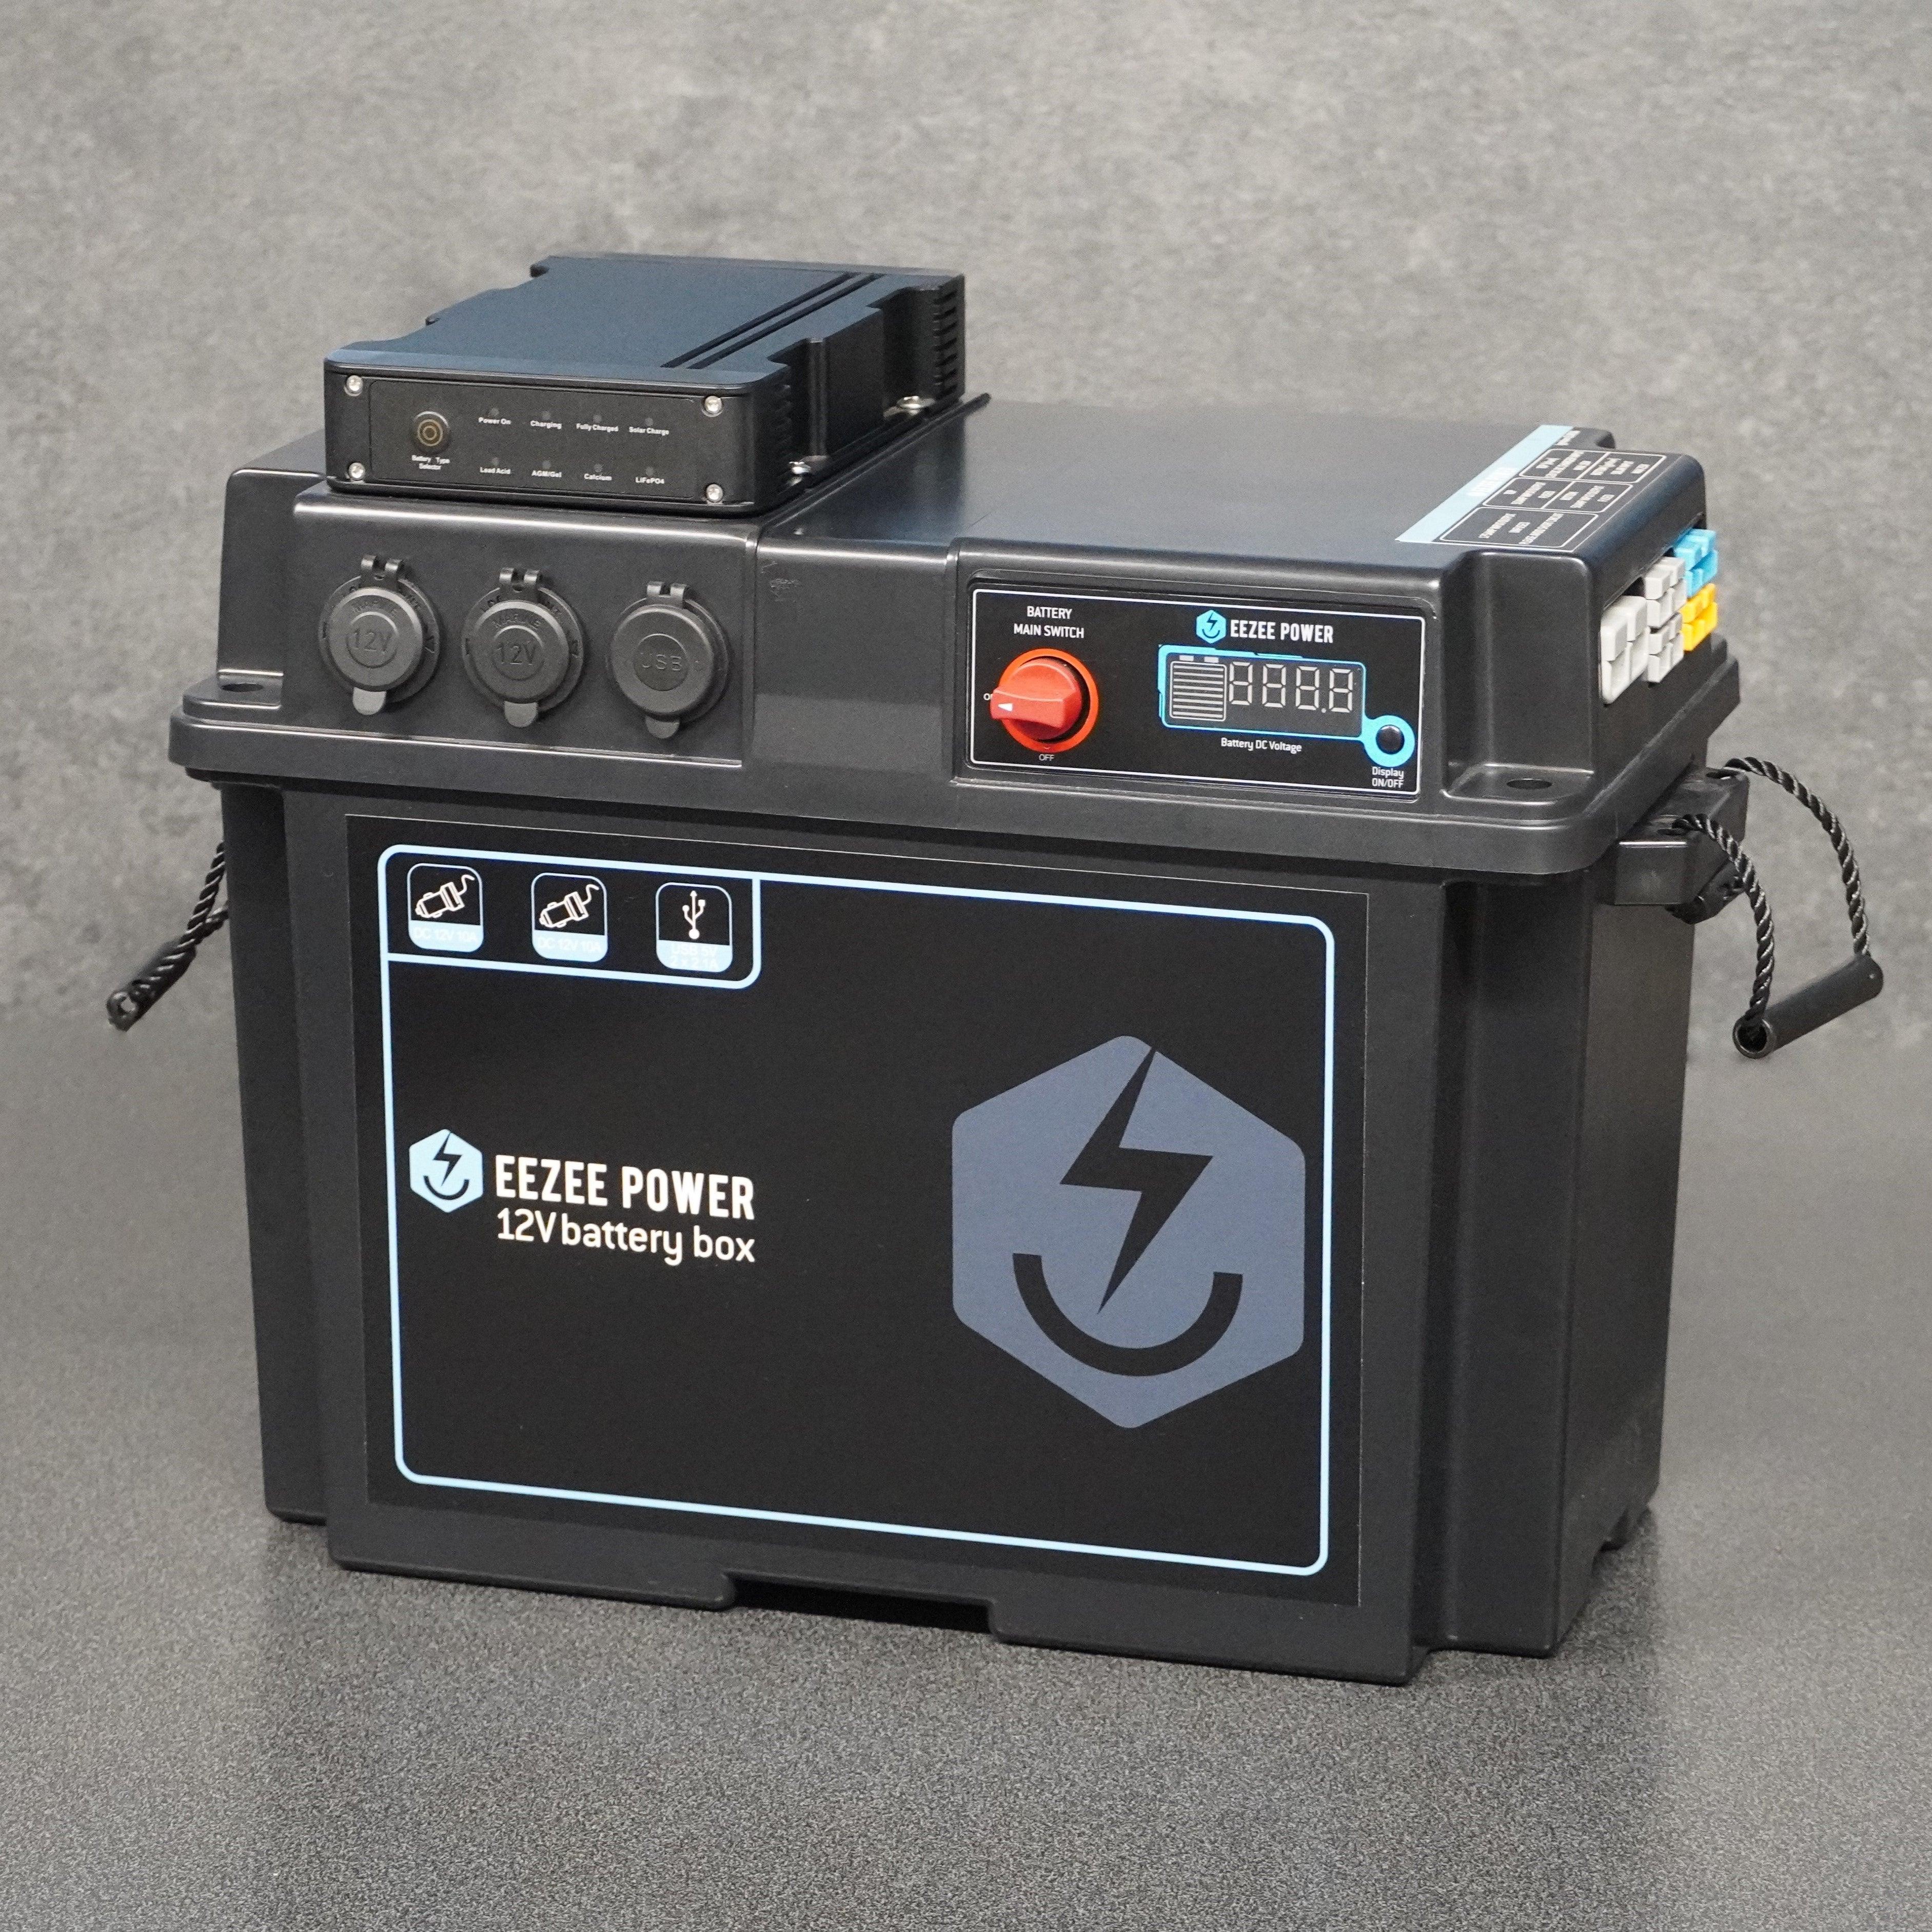 Eezee Power 12V Battery Box: Your Portable Power Solution